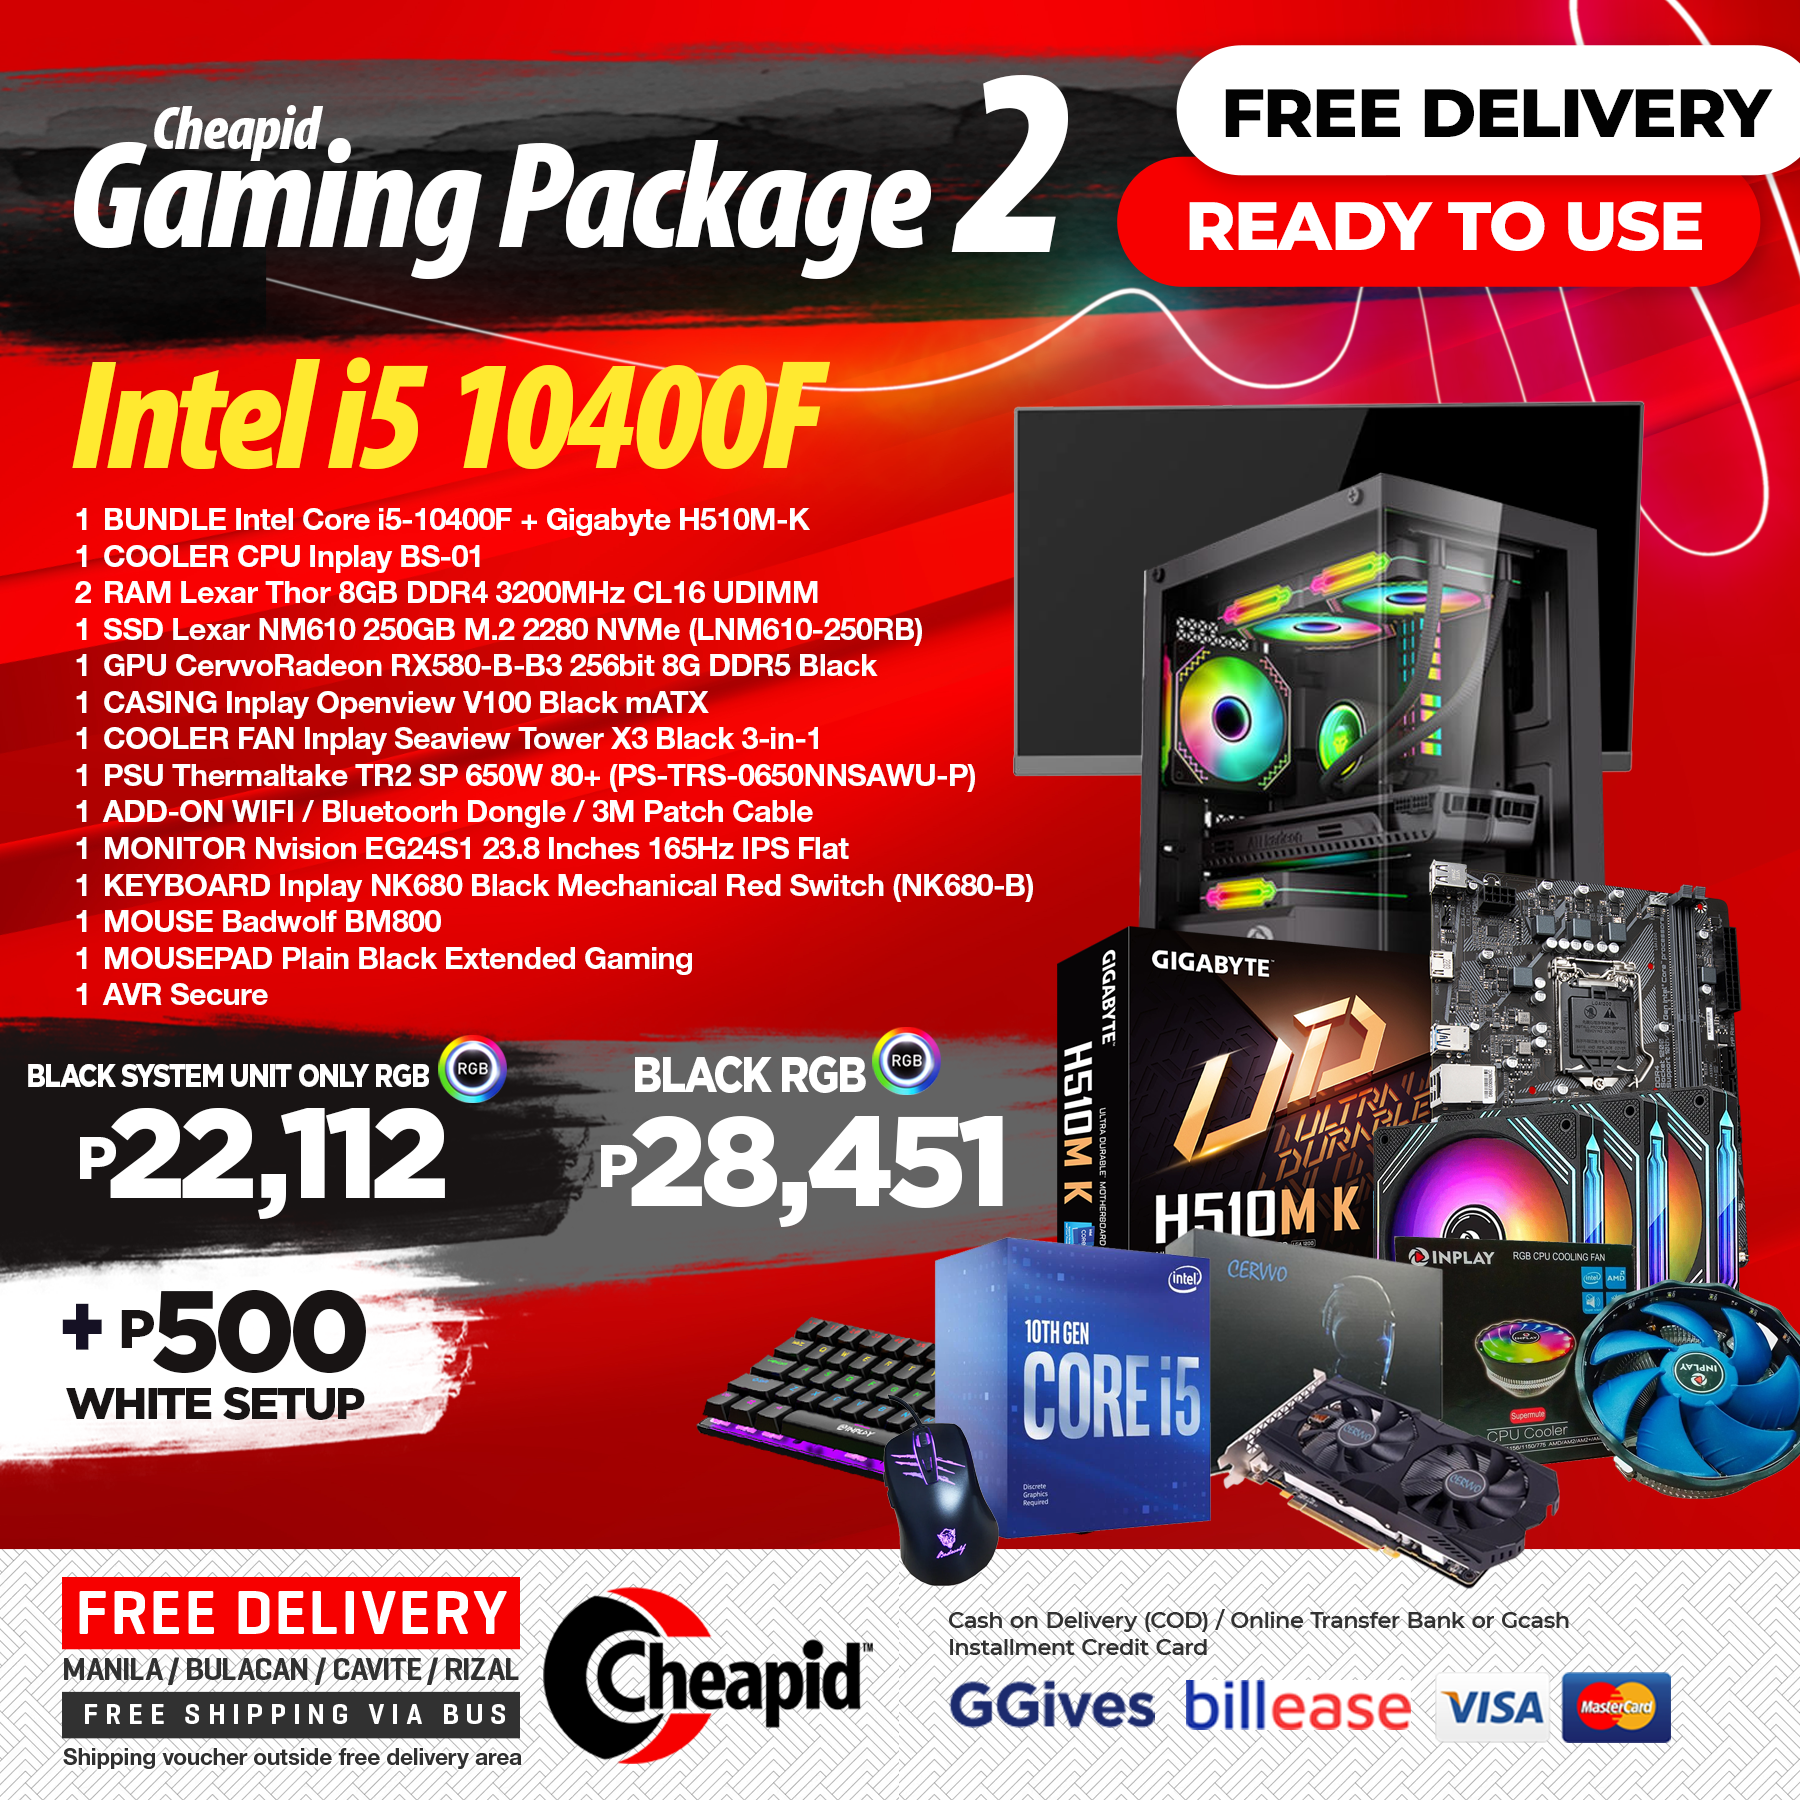 Cheapid Gaming Package - Classic Setup 02